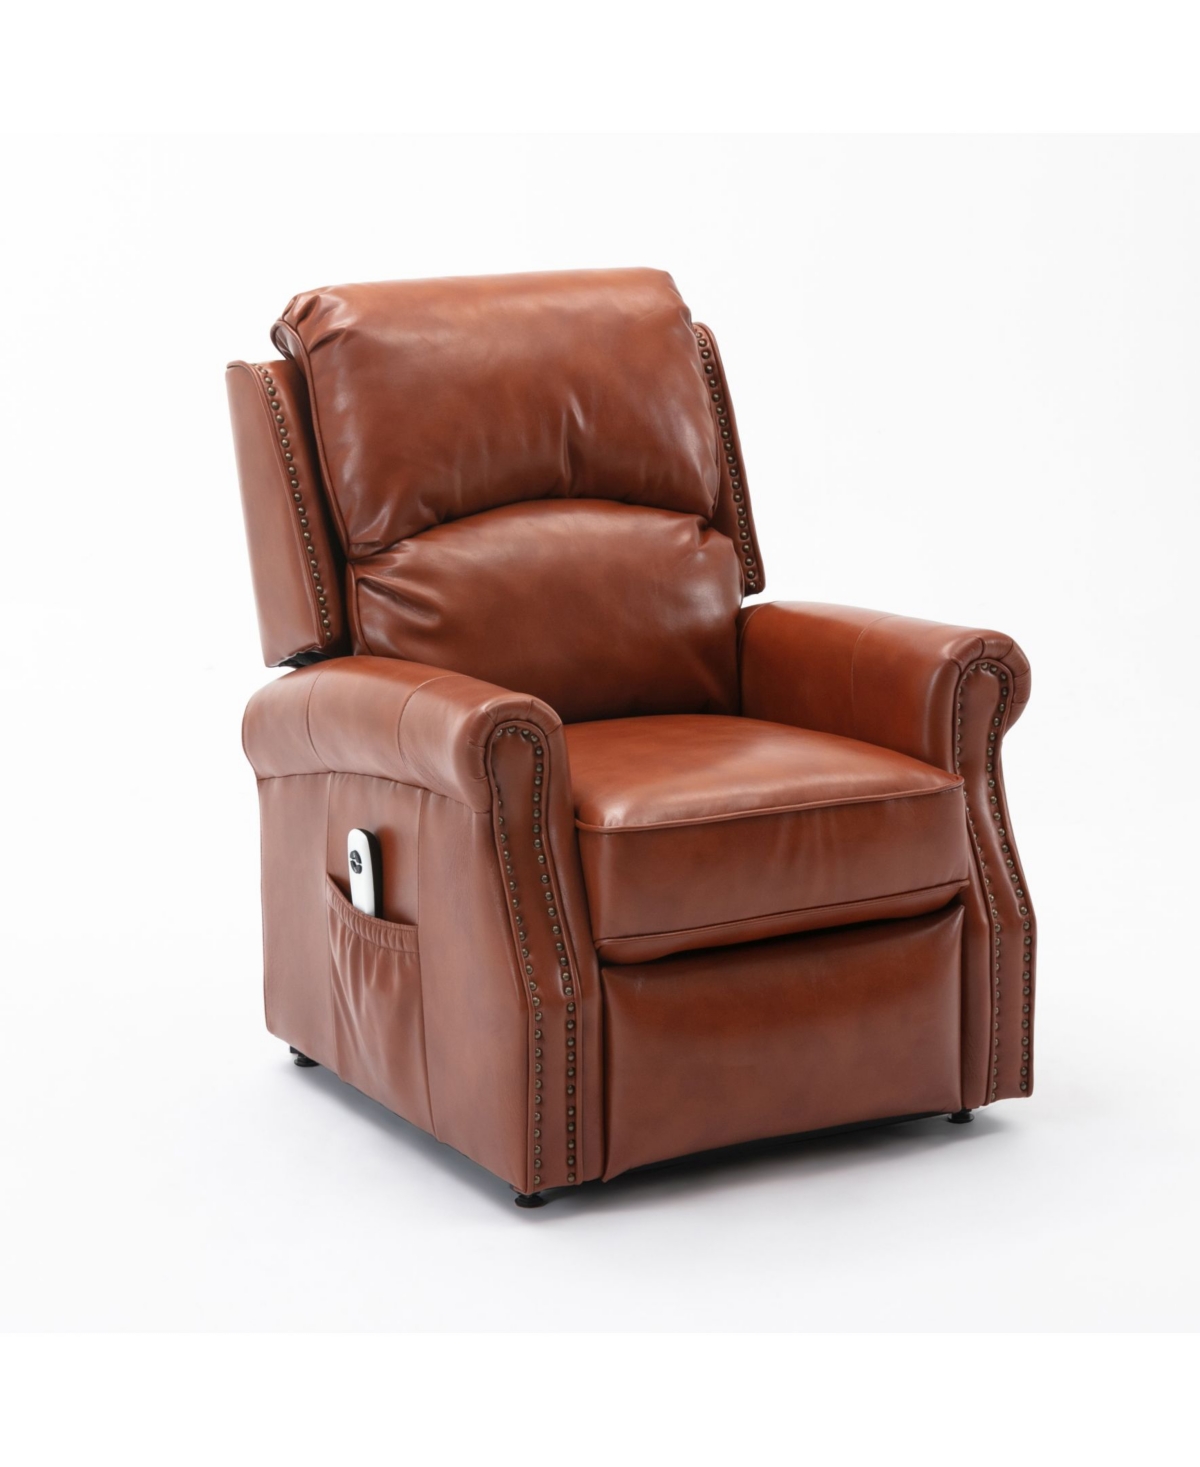 Comfort Pointe Crofton Lift Chair In Rust